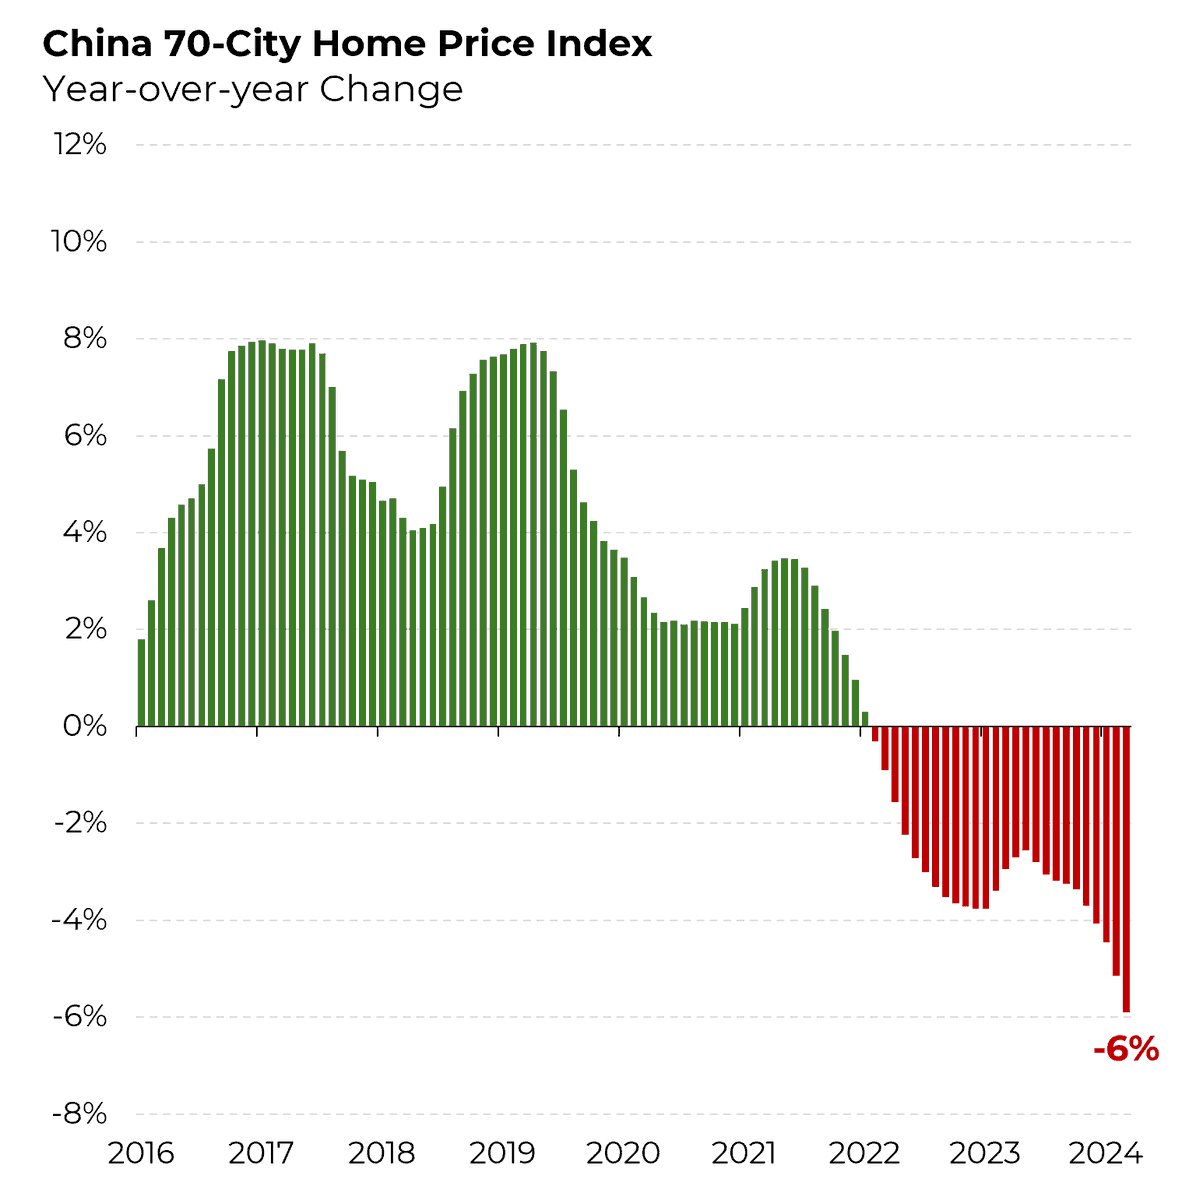 China’s property bubble is bursting. After nearly a decade of rapid gains, home prices have fallen by 6% over the last year. @Morning_Joe